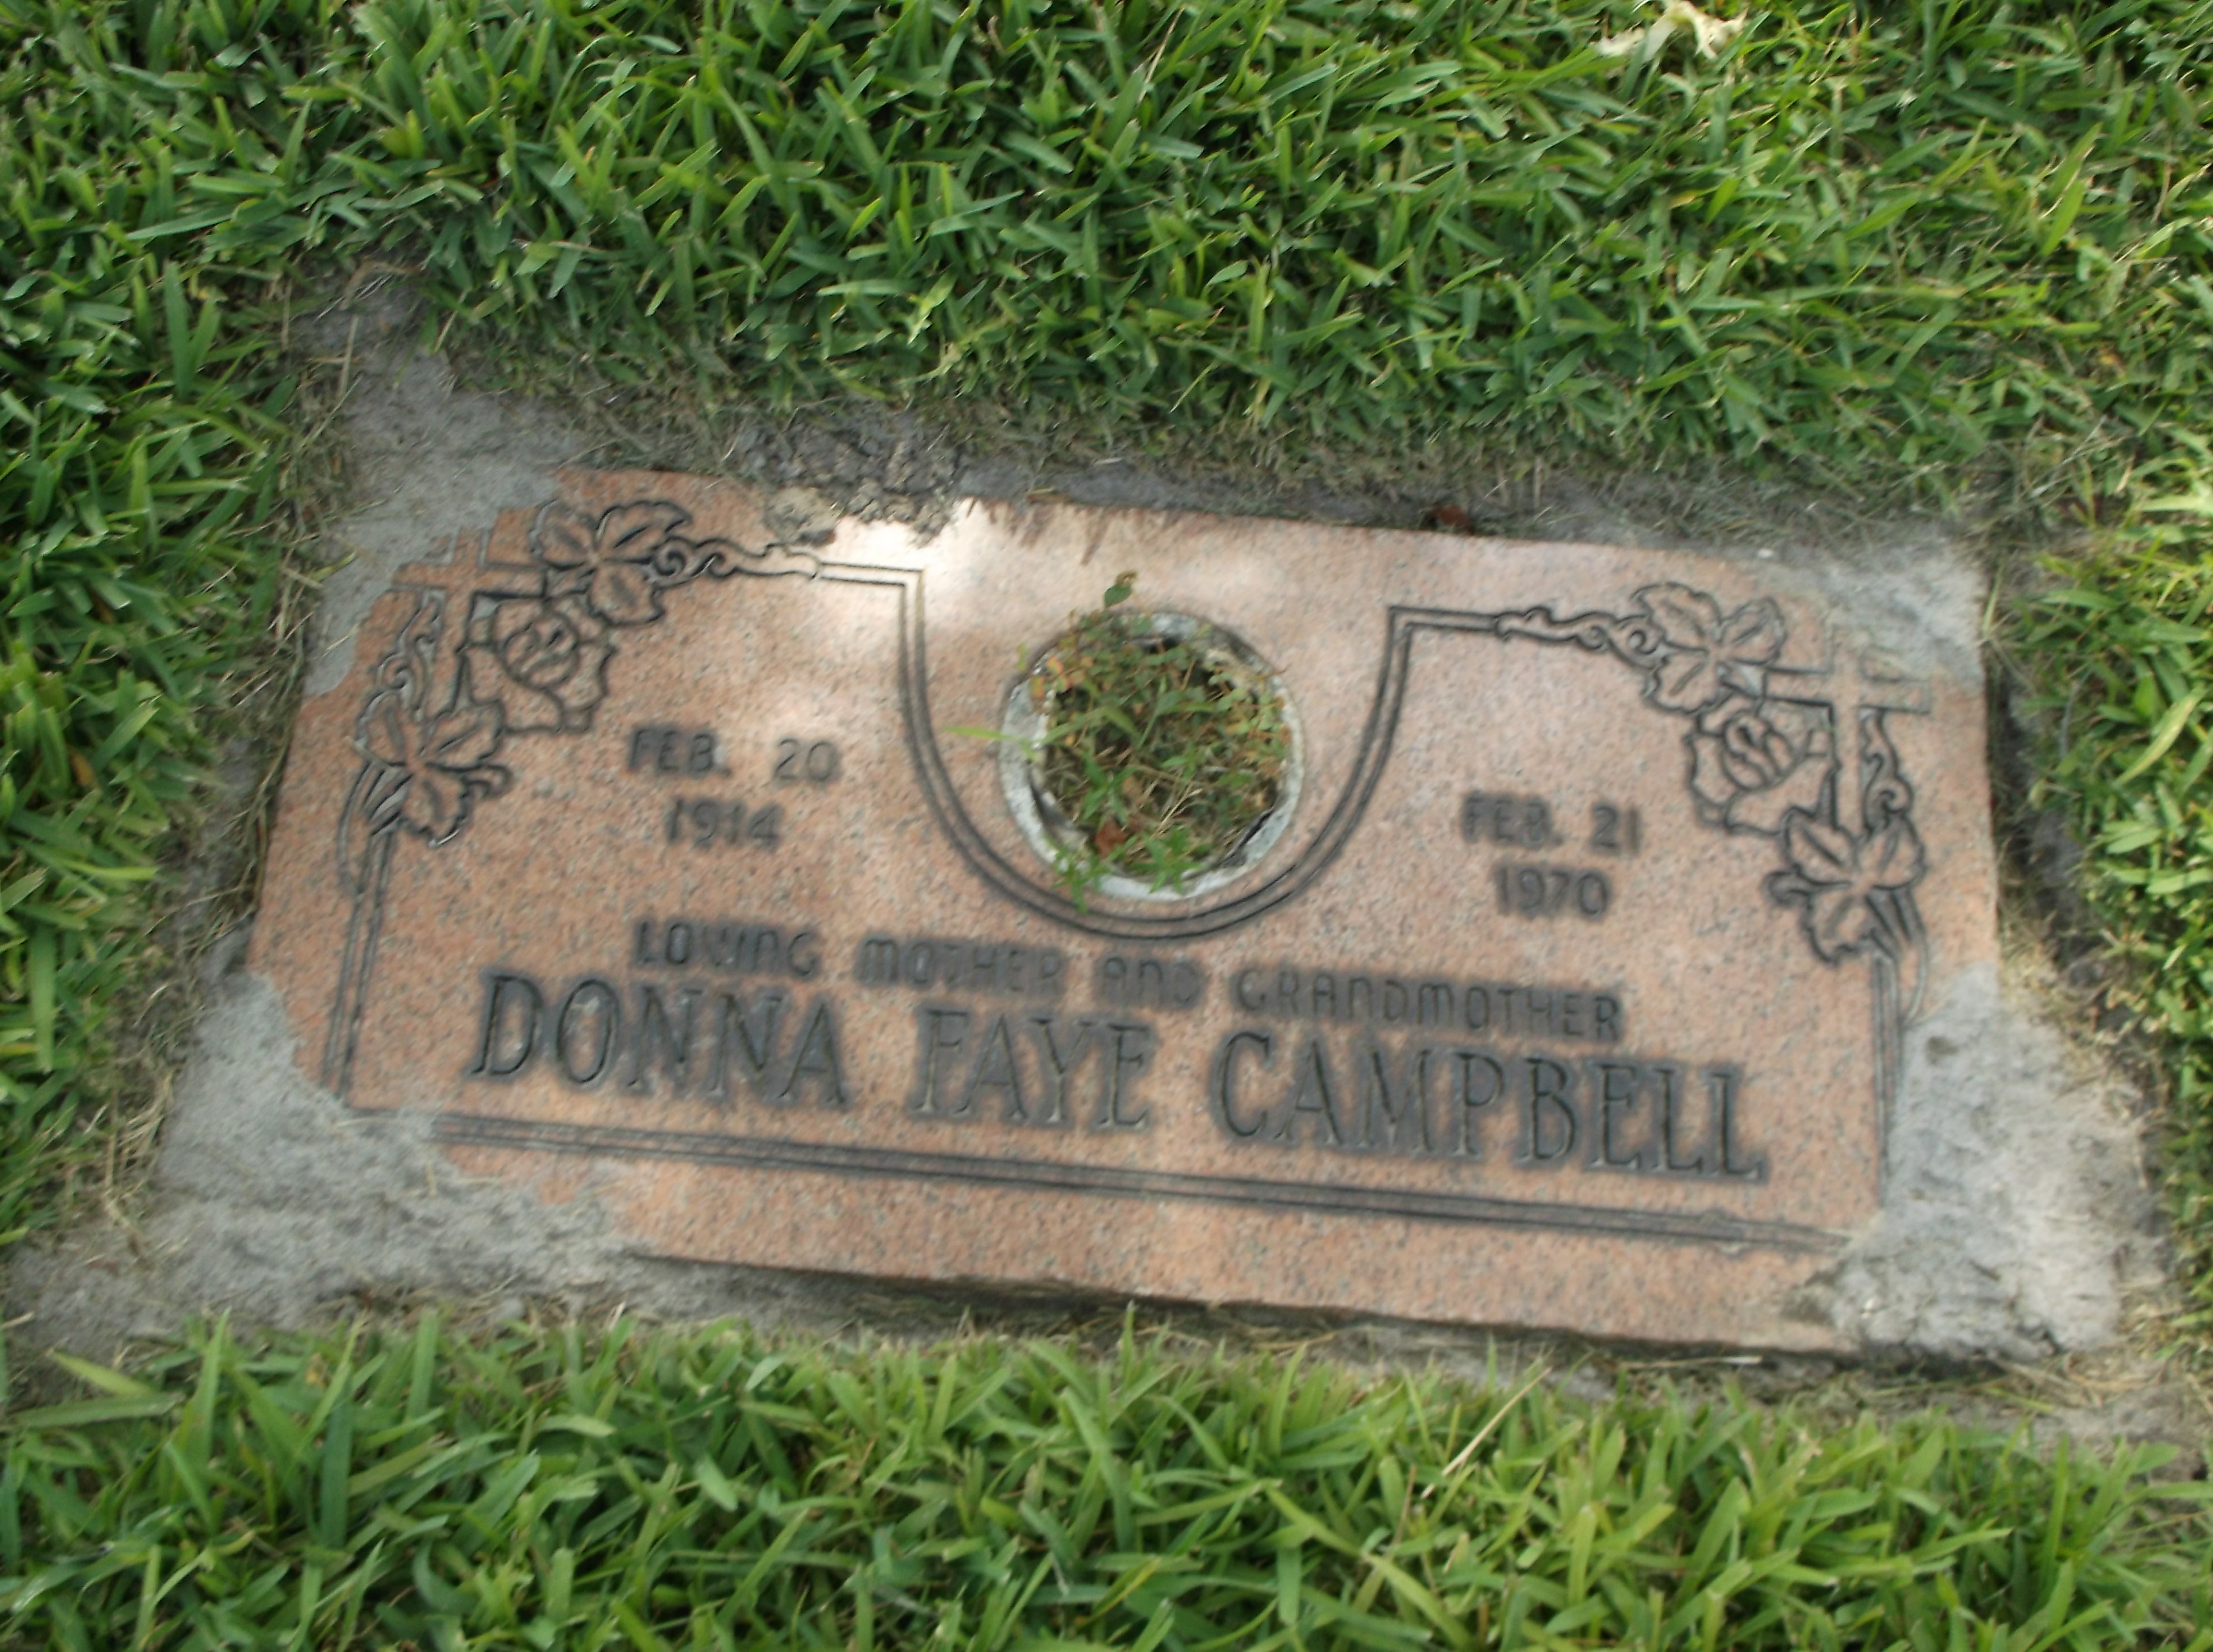 Donna Faye Campbell